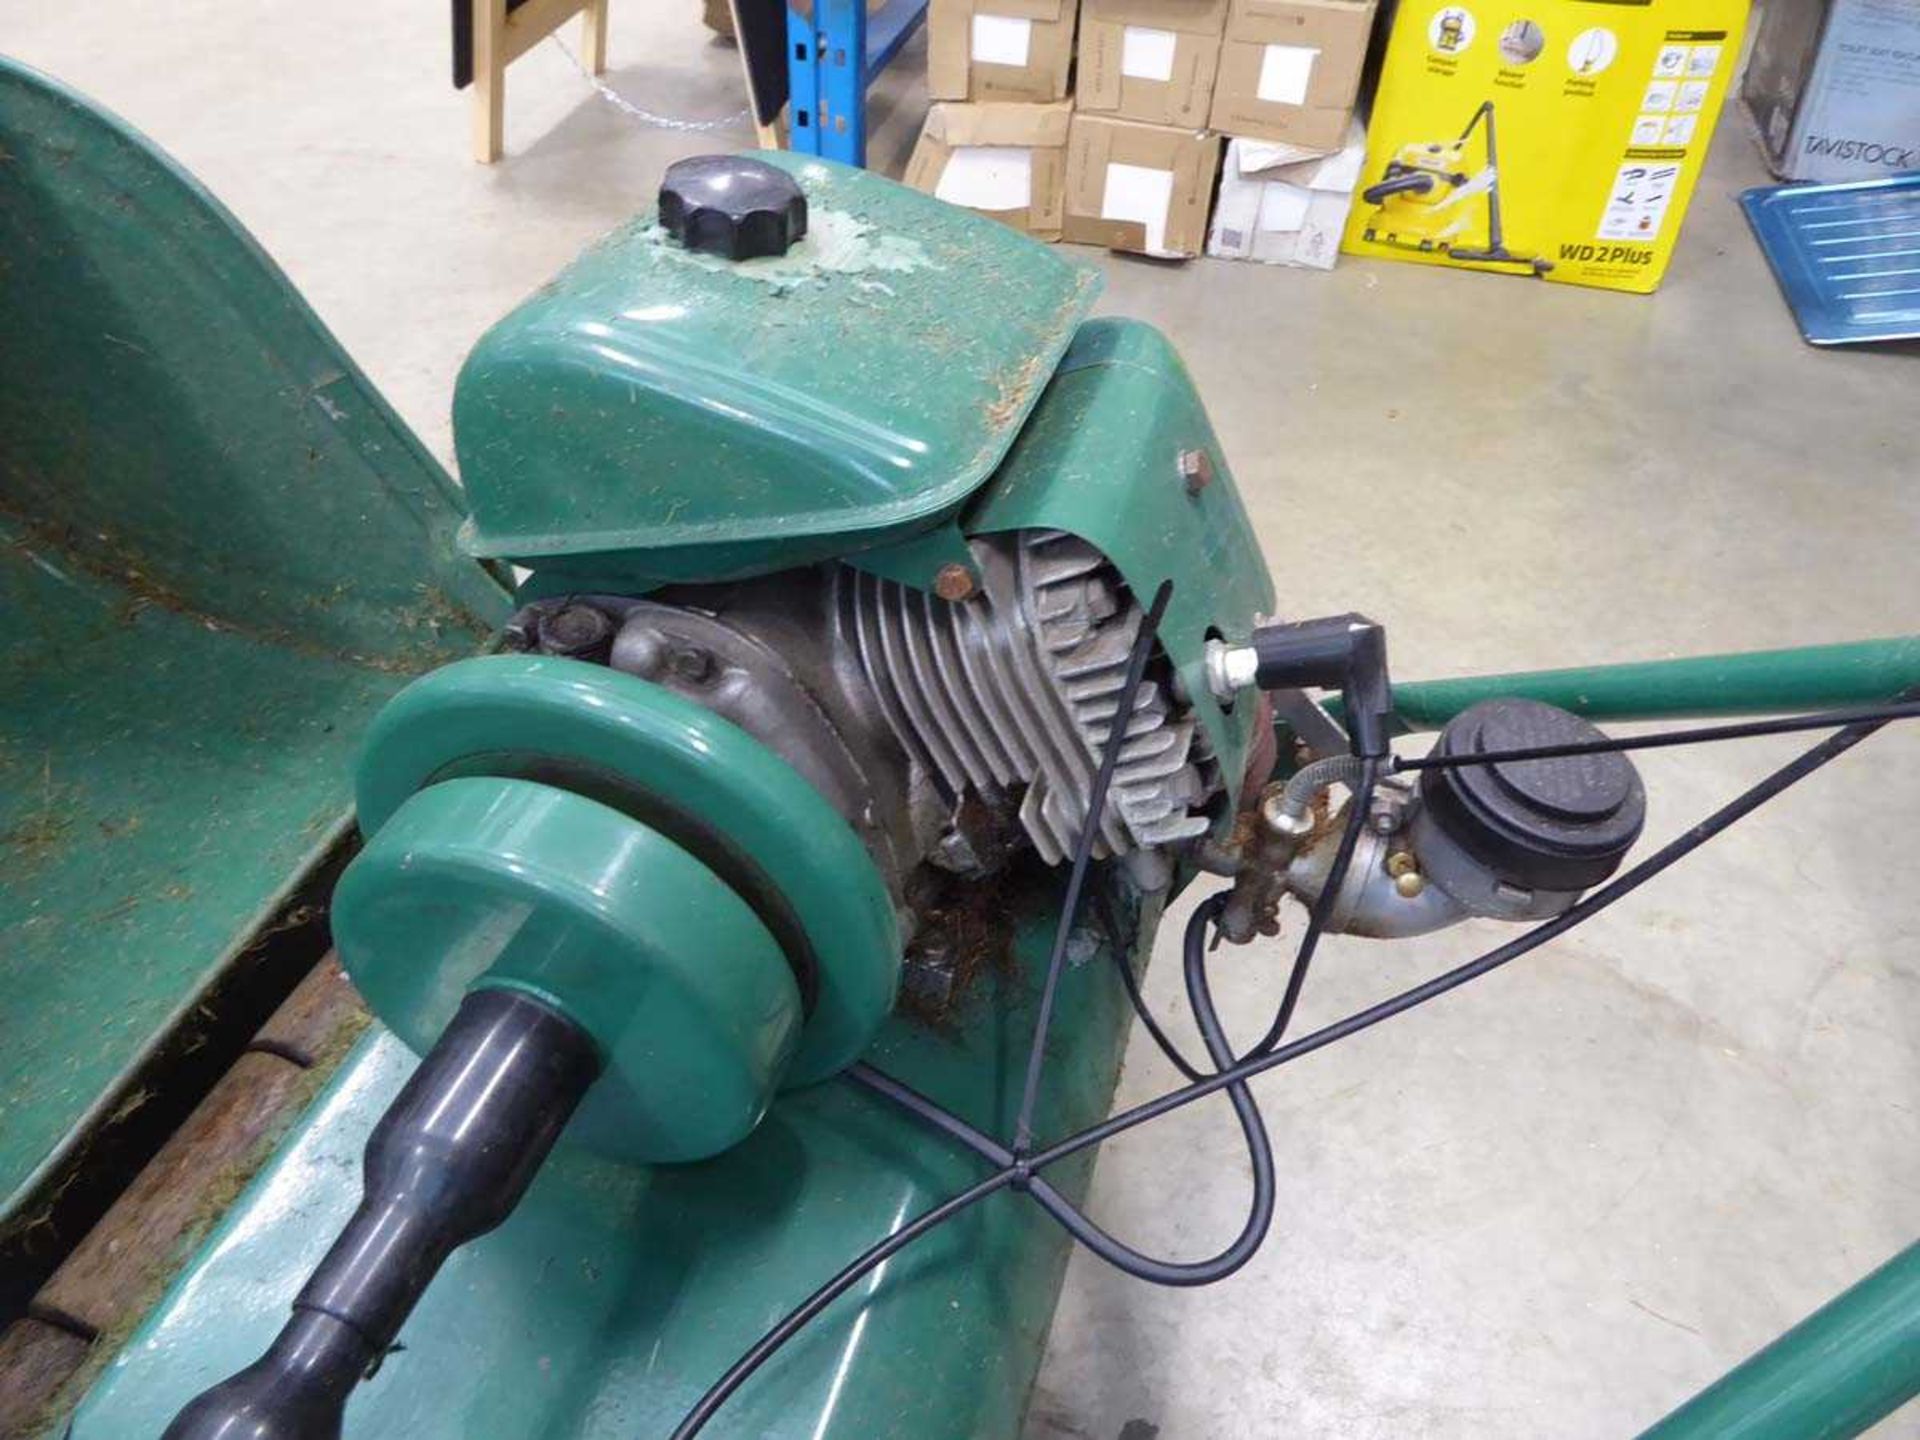 Ransomes Marquess petrol powered cylinder mower complete with grass box - Image 3 of 4